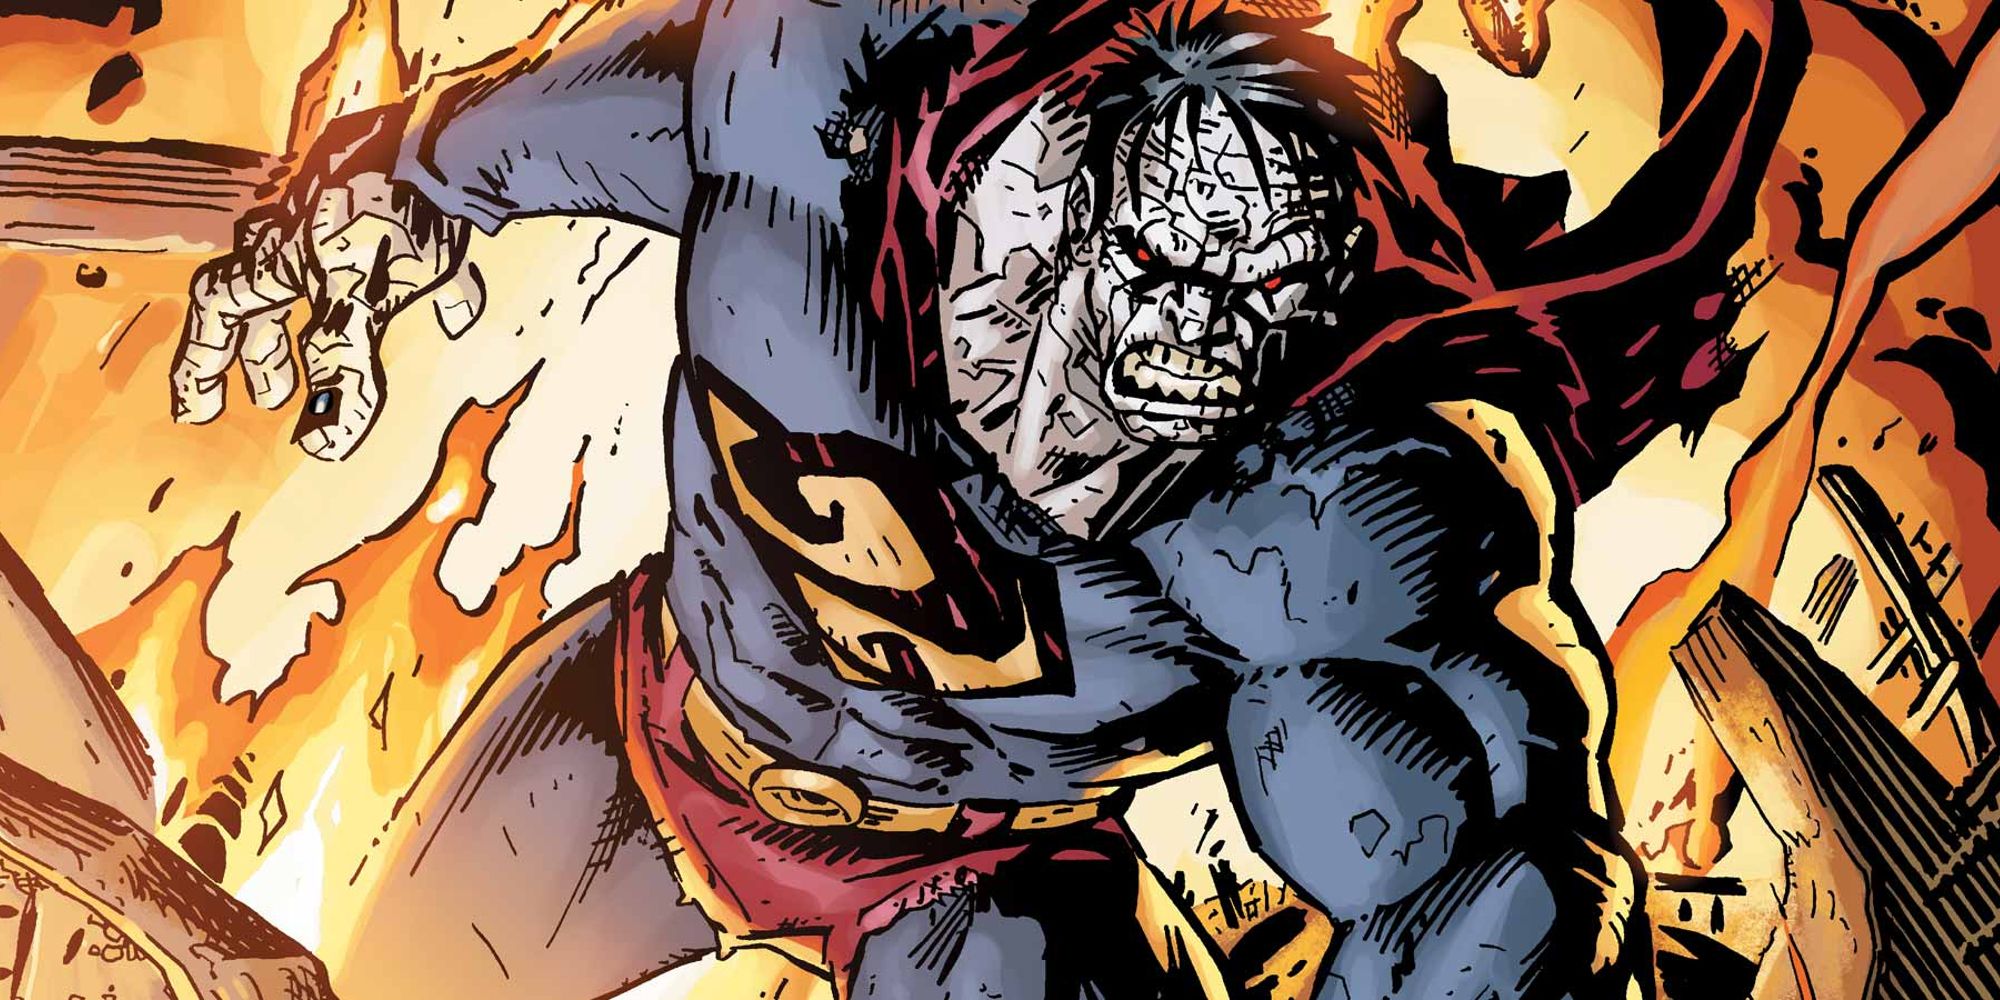 Bizarro Superman coming out of flames in DC Comics